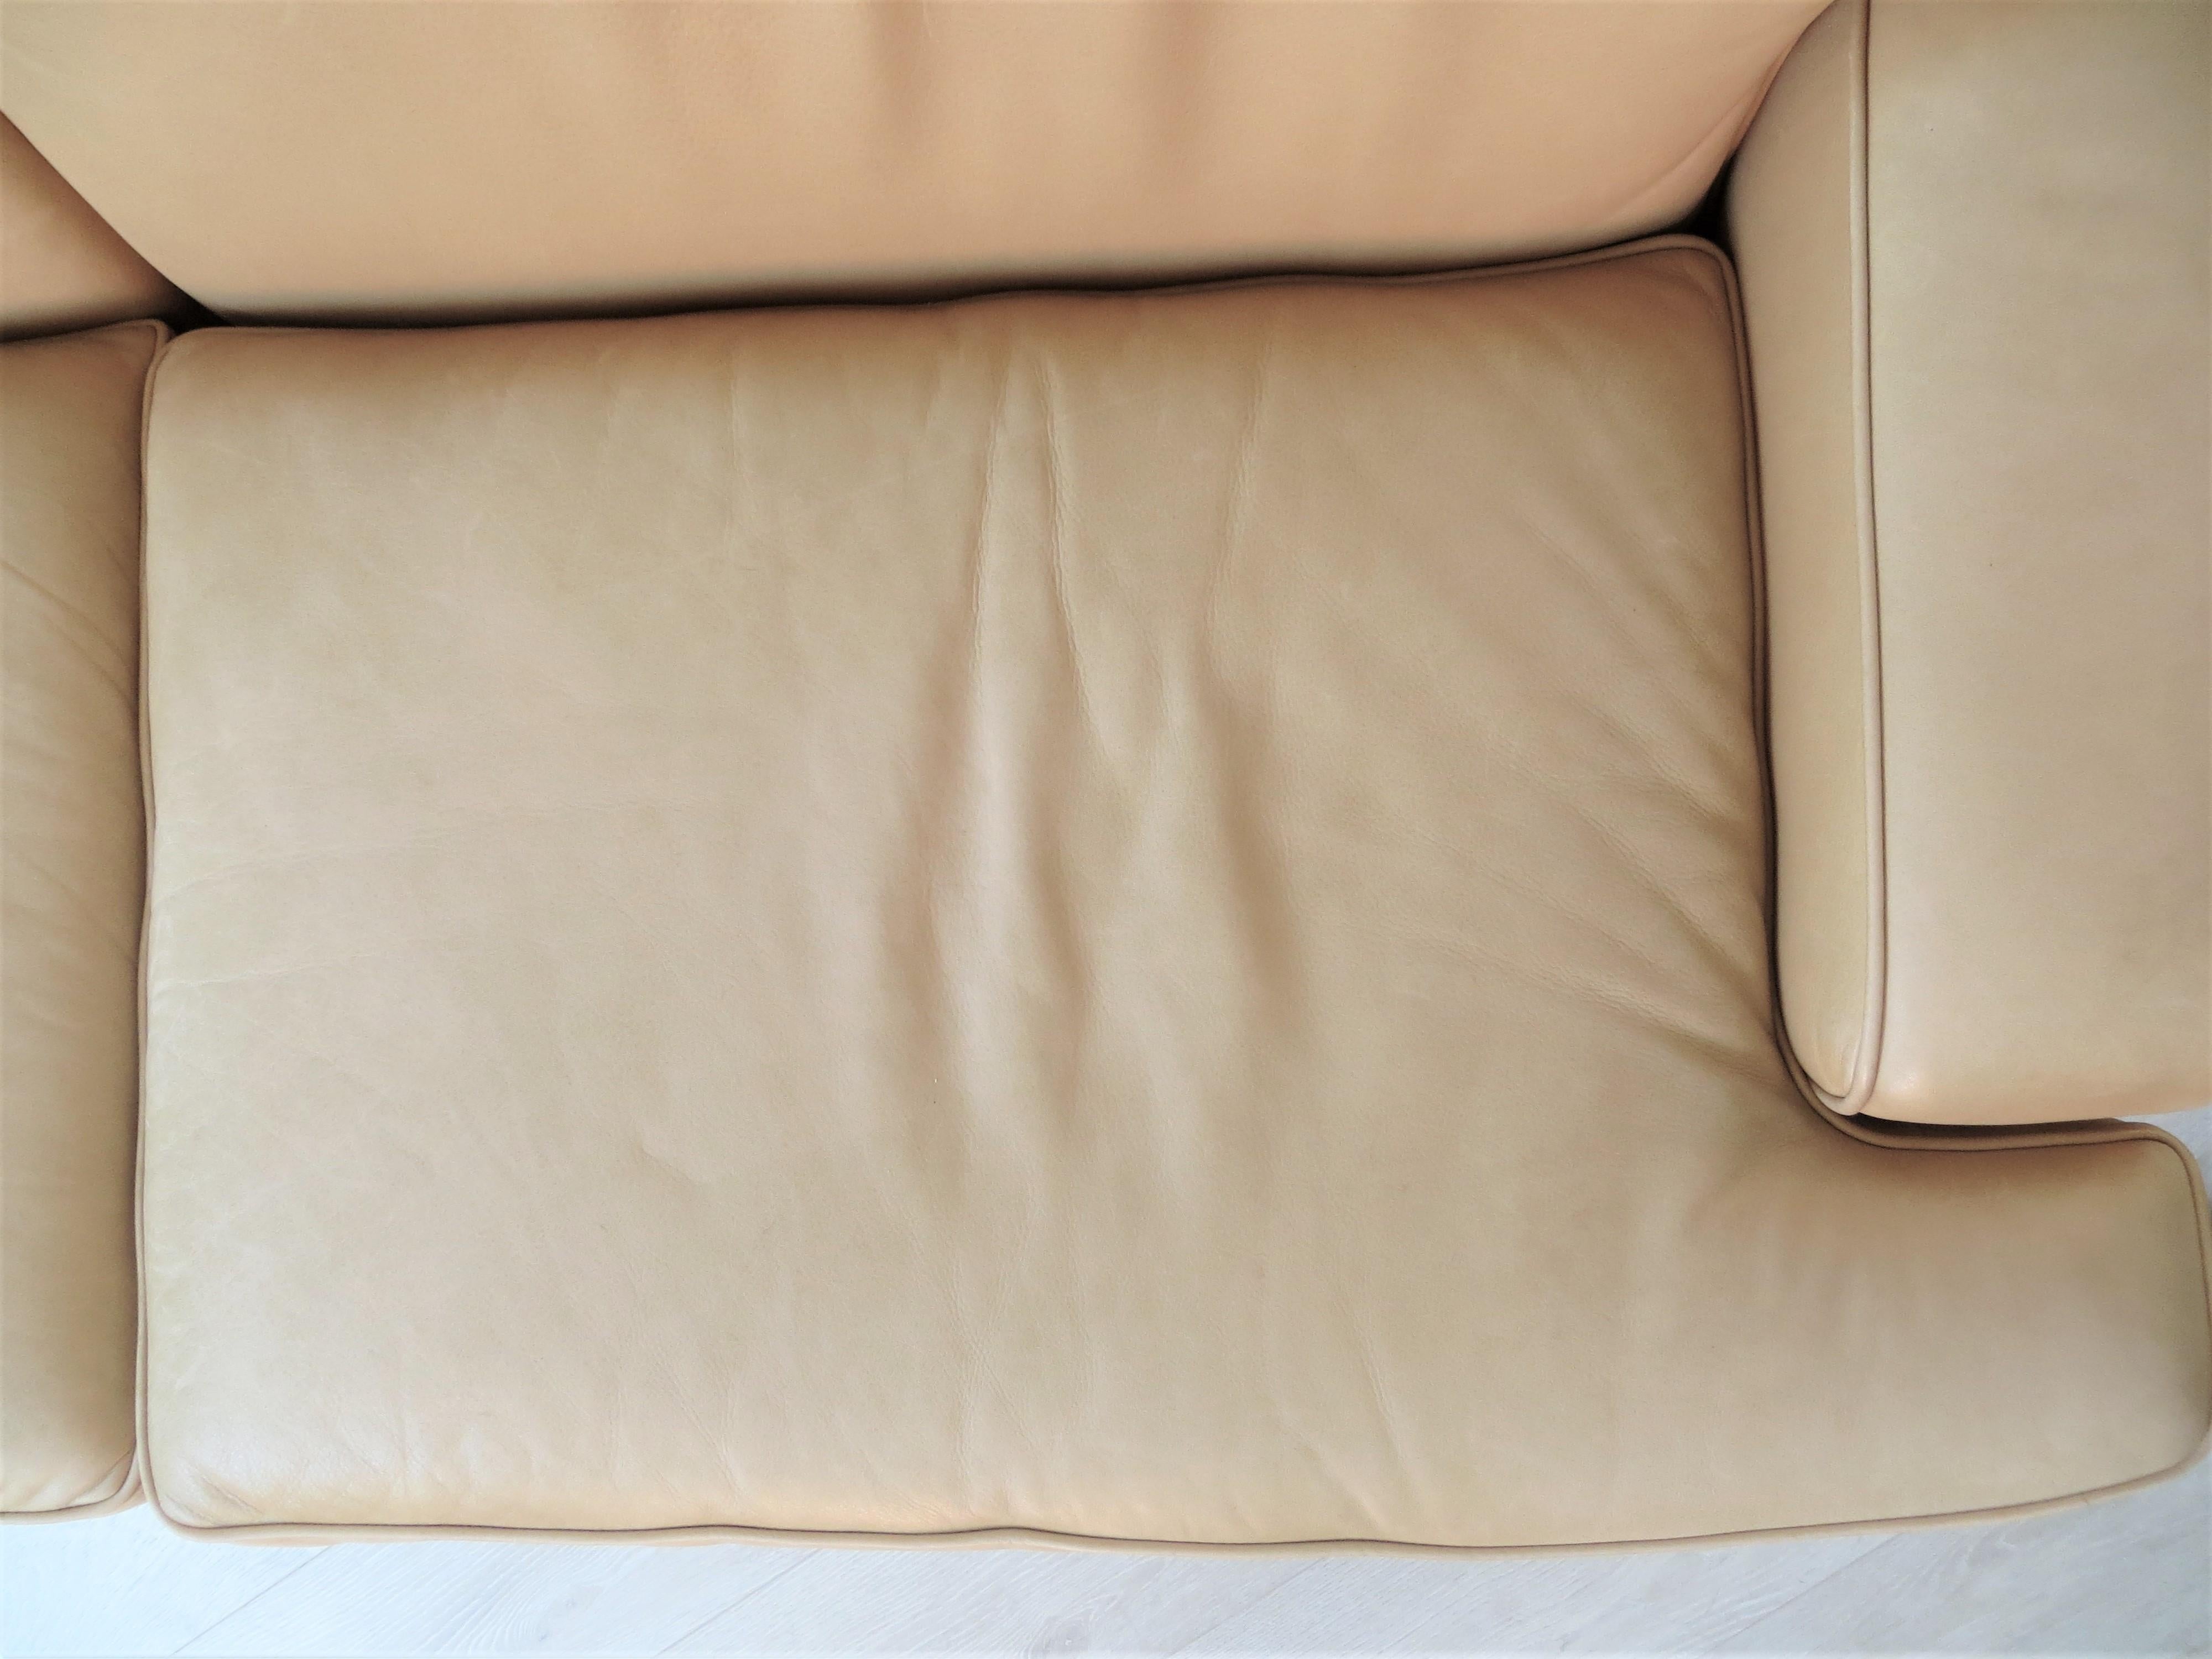 Arne Norell Vintage Leather Merkur Sofa Loveseat in Butterscotch Brown , 1960s For Sale 5